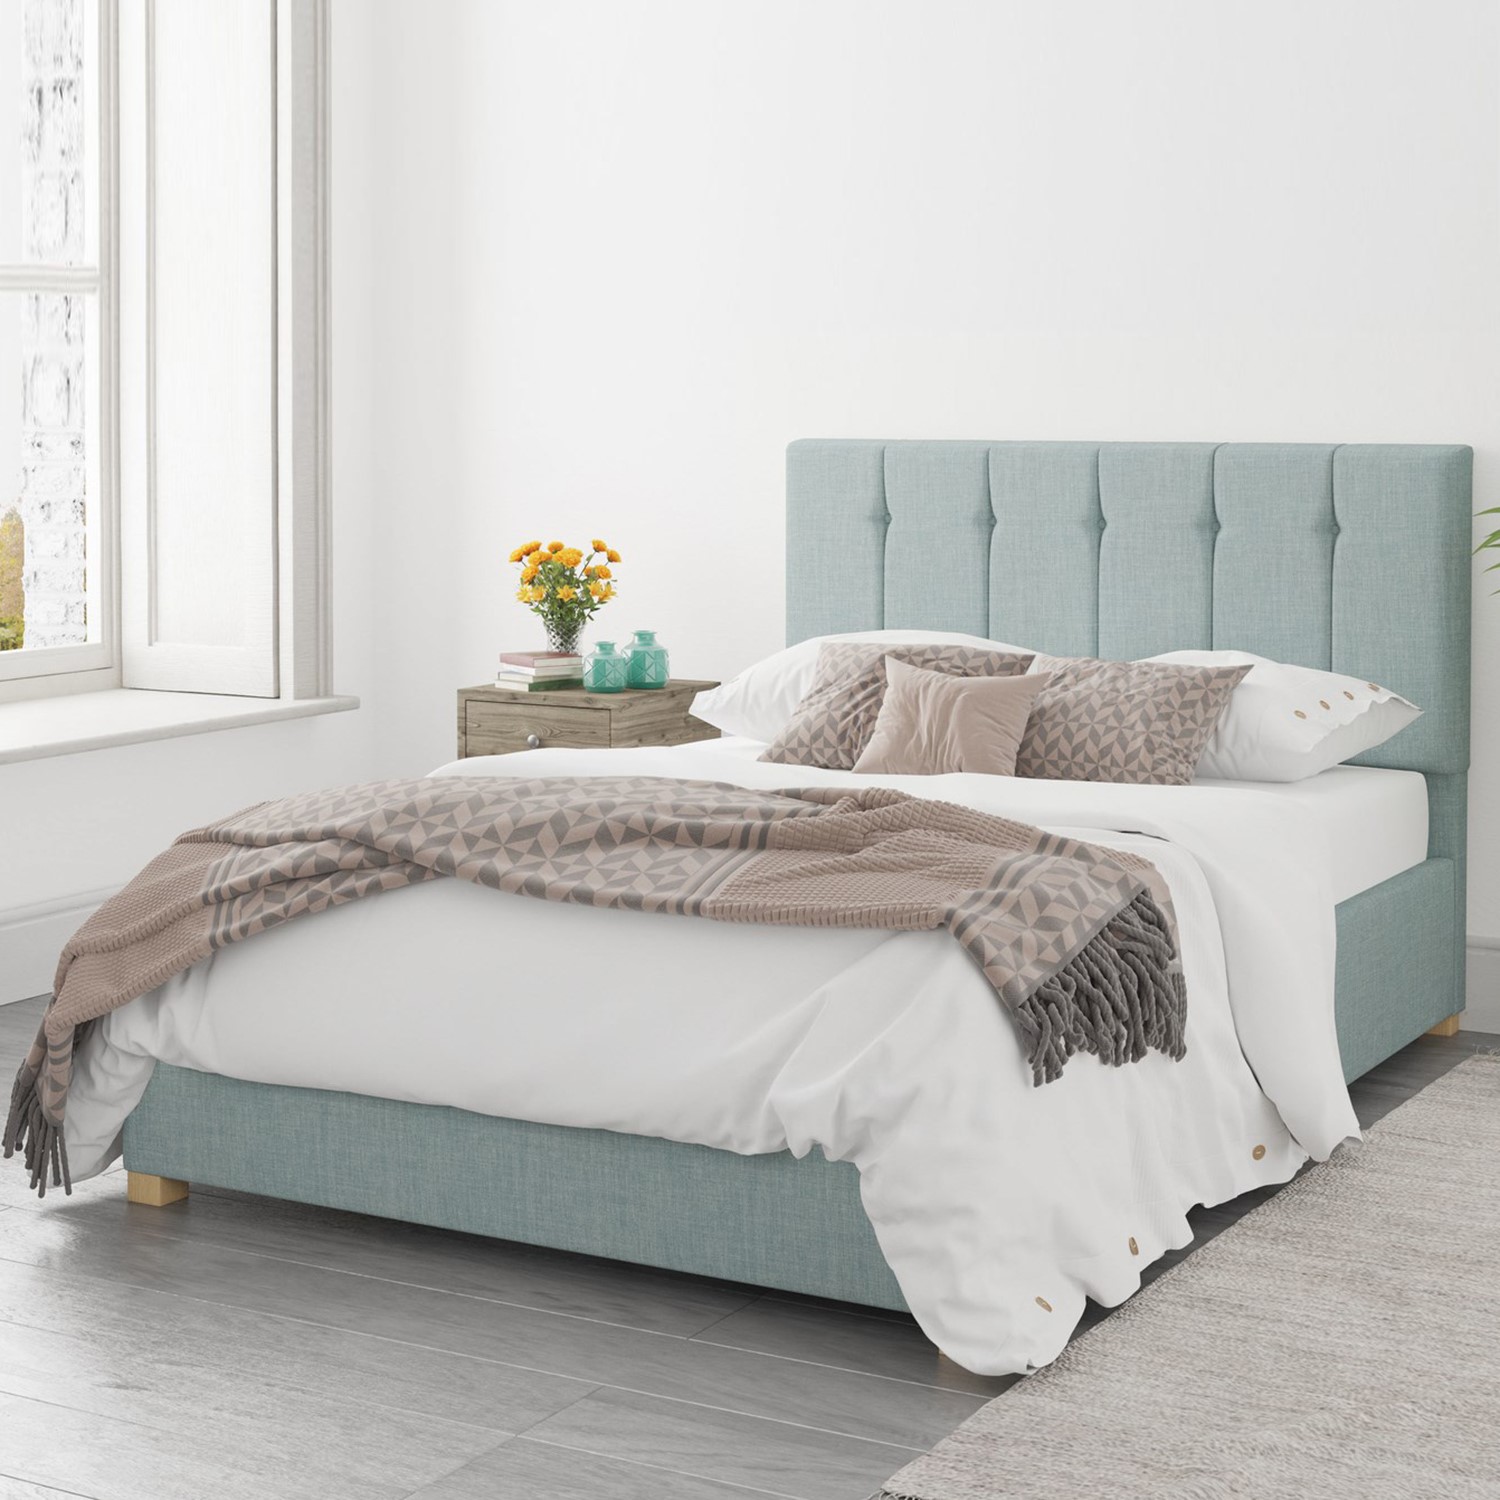 Read more about Light blue fabric double ottoman bed pimilico aspire